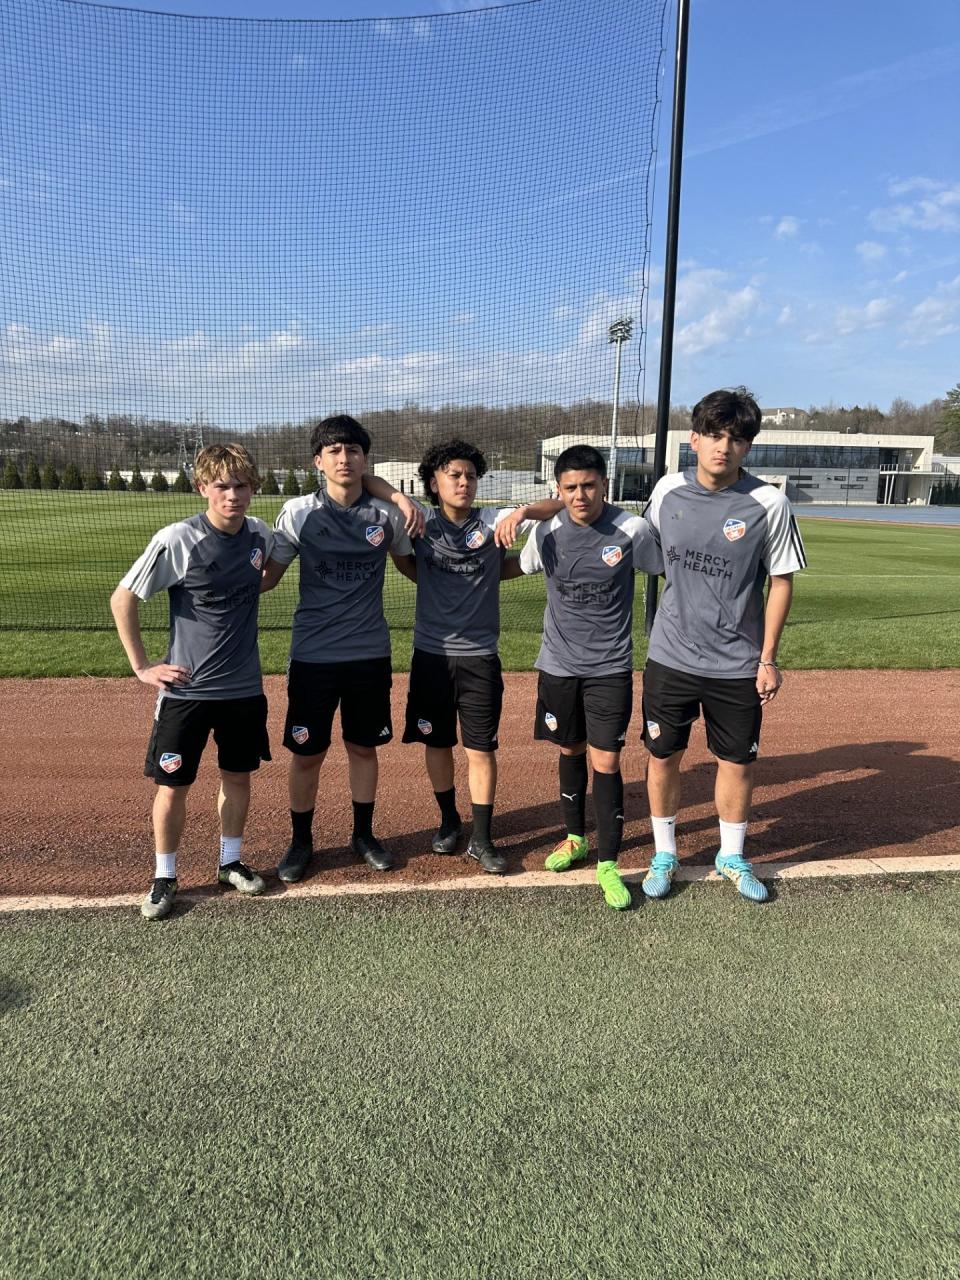 (From left to right) Caleb Cliburn, Daniel Guerra, Angelo Vieyra, Angelnoe Perez and Aaron Chavez pose for picture during their youth soccer trials for F.C. Cincinnati in Cincinnati, Ohio.